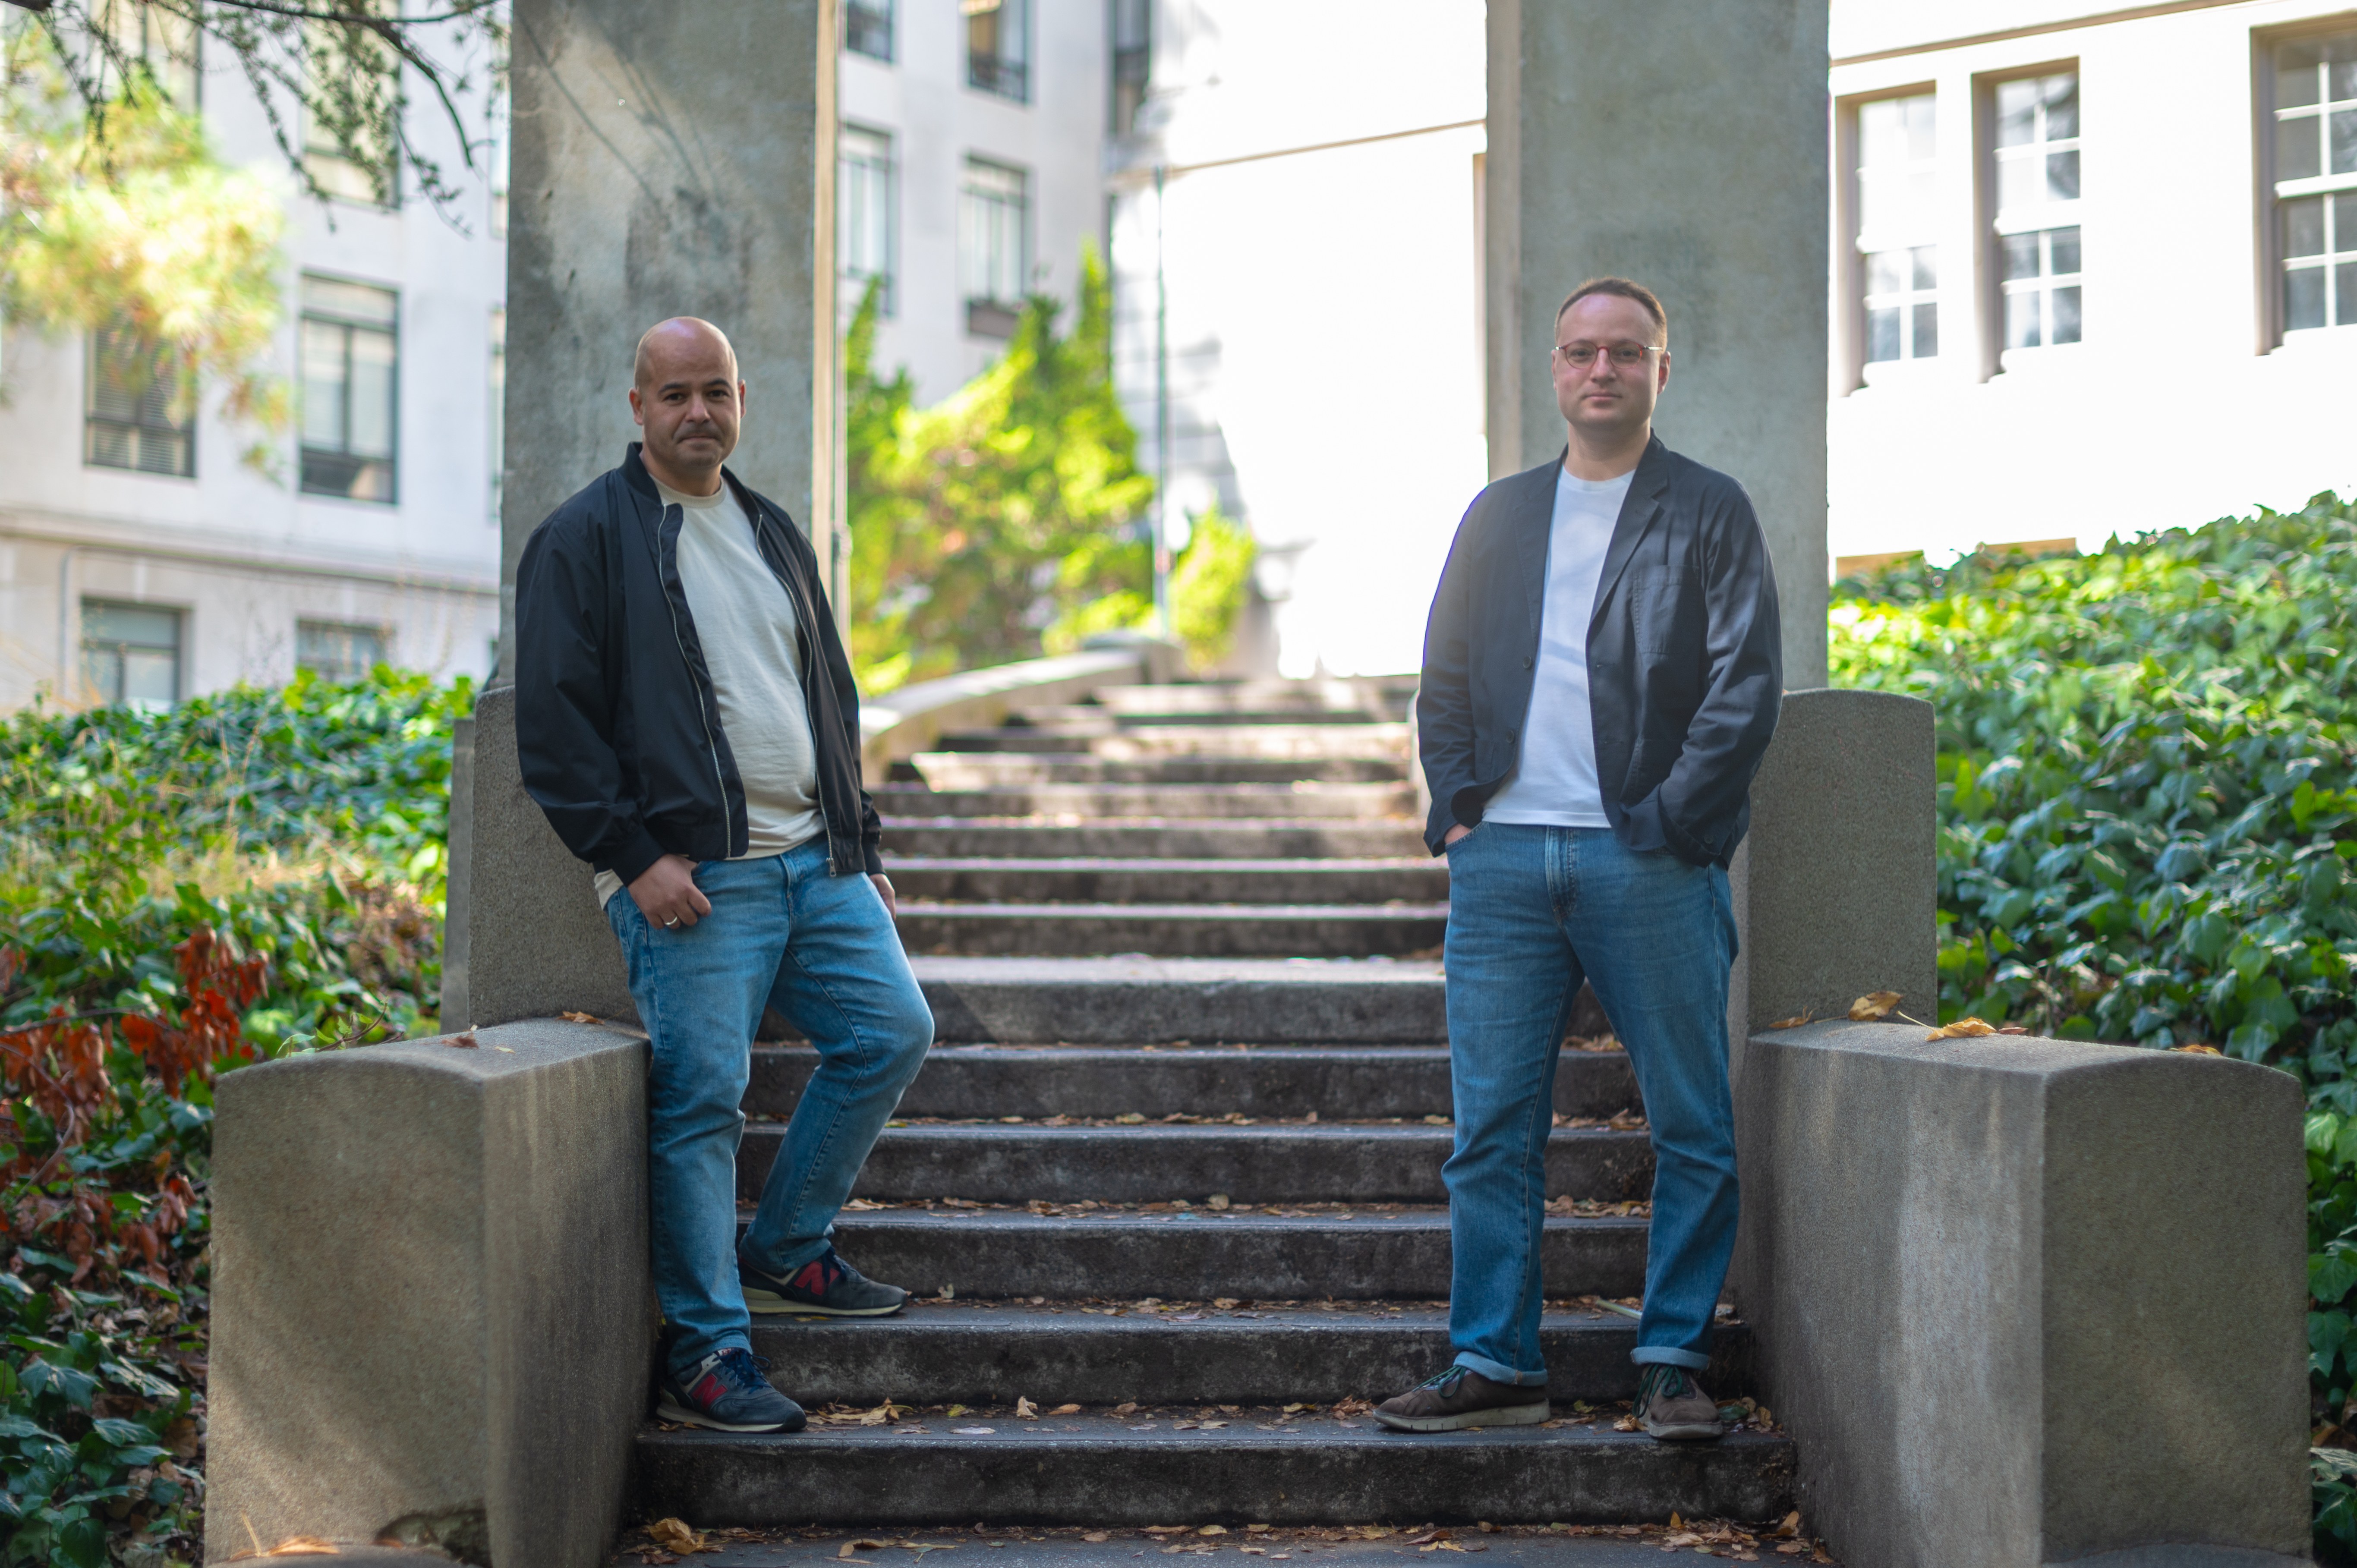 Two men in jeans and dark jackets pose for a portrait on an outdoor staircase